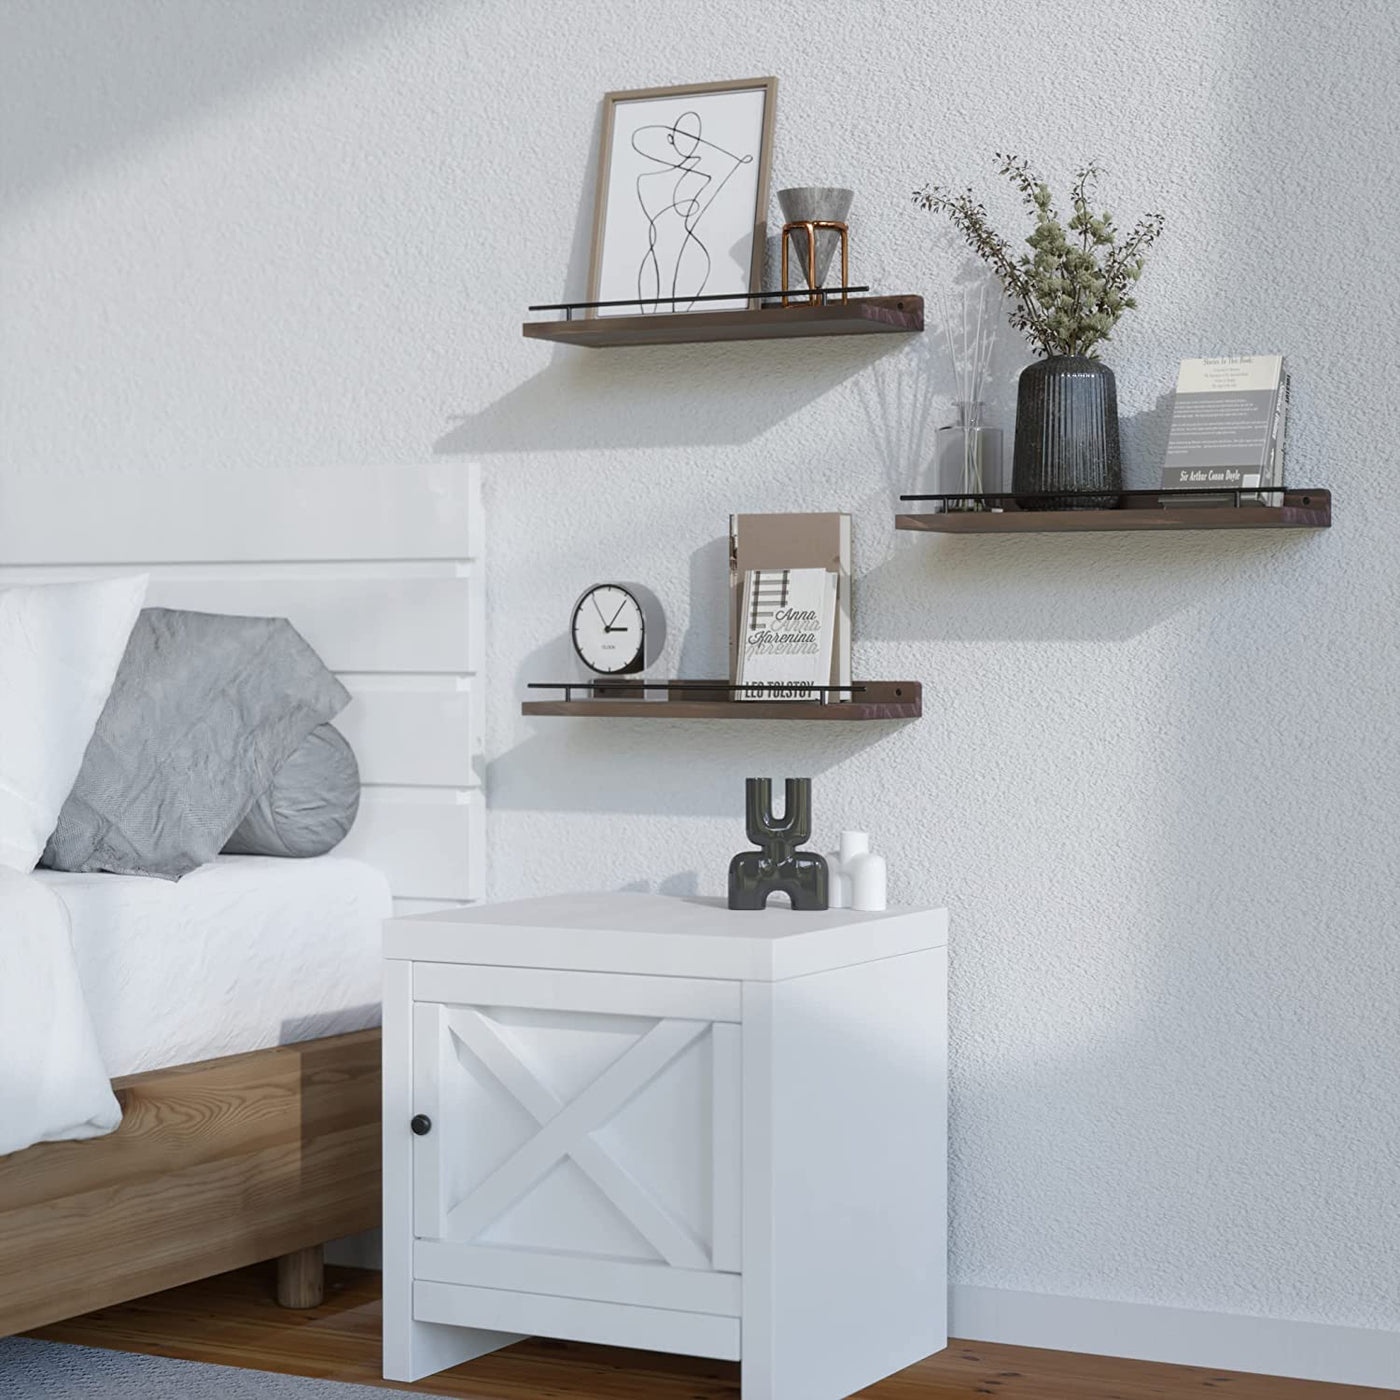 Floating Shelves with Black Metal Guardrail, Shelves for Wall